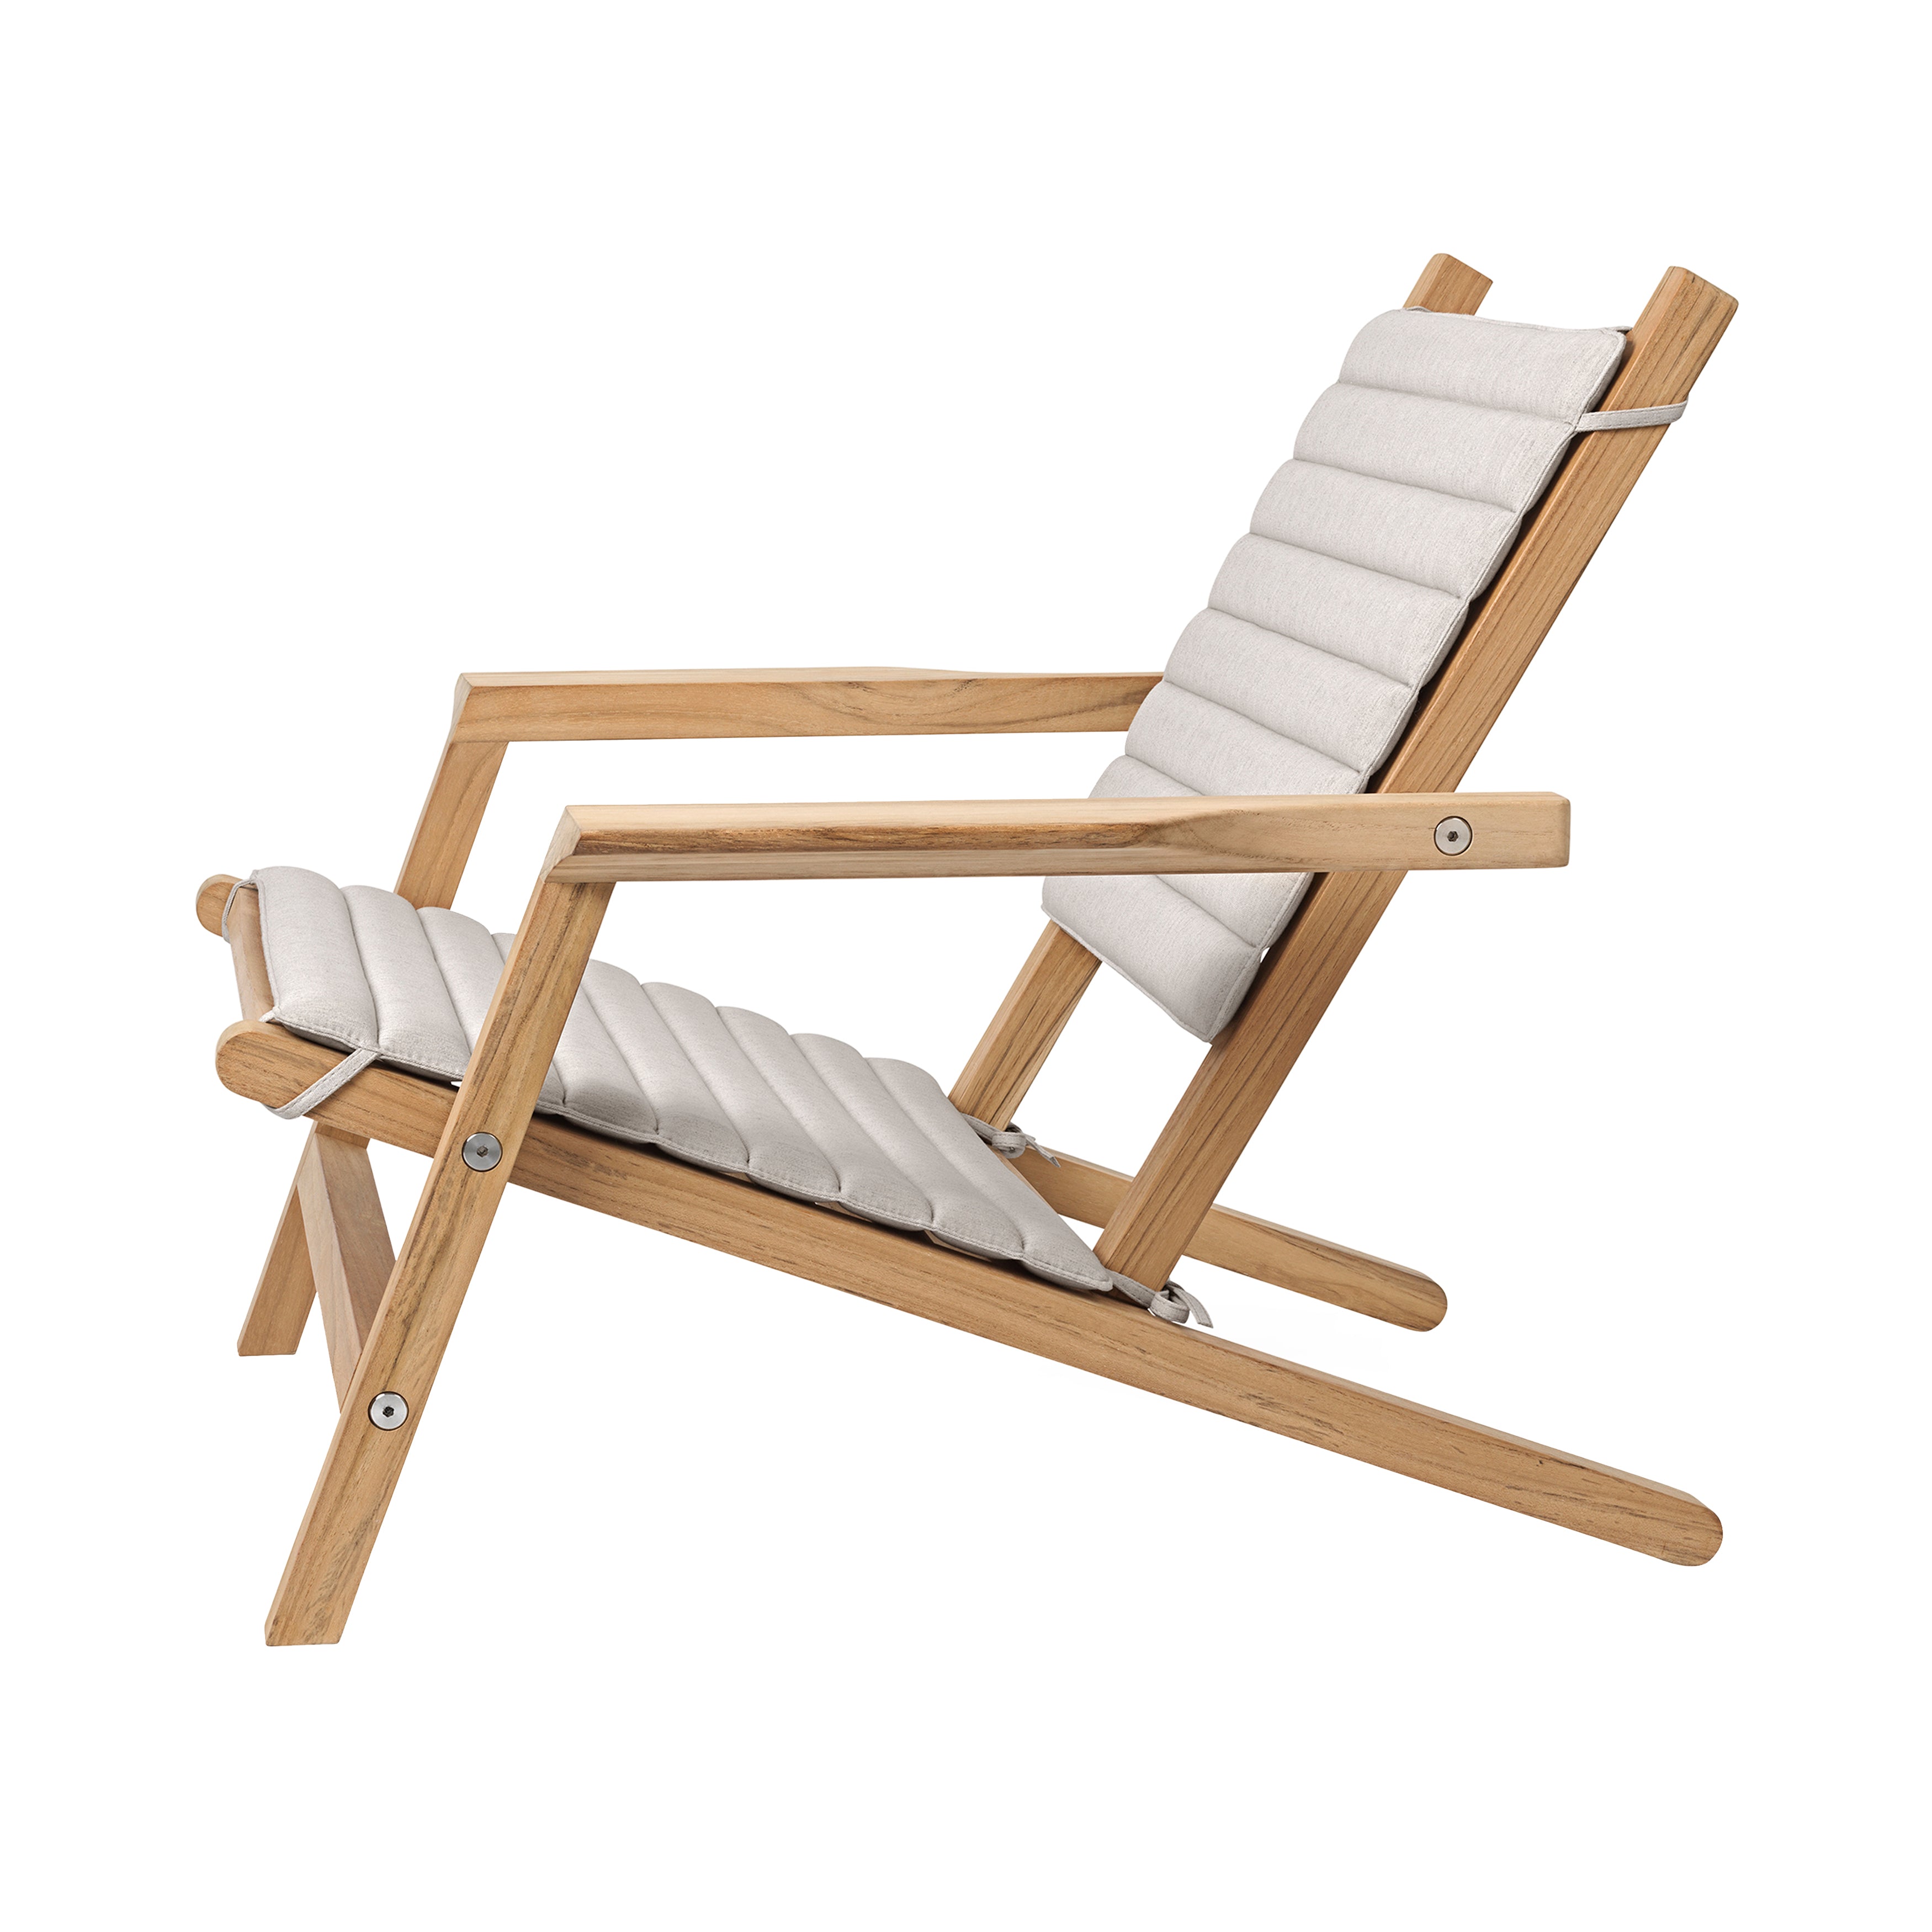 AH603 Outdoor Deck Chair: With Seat + Back Cushion